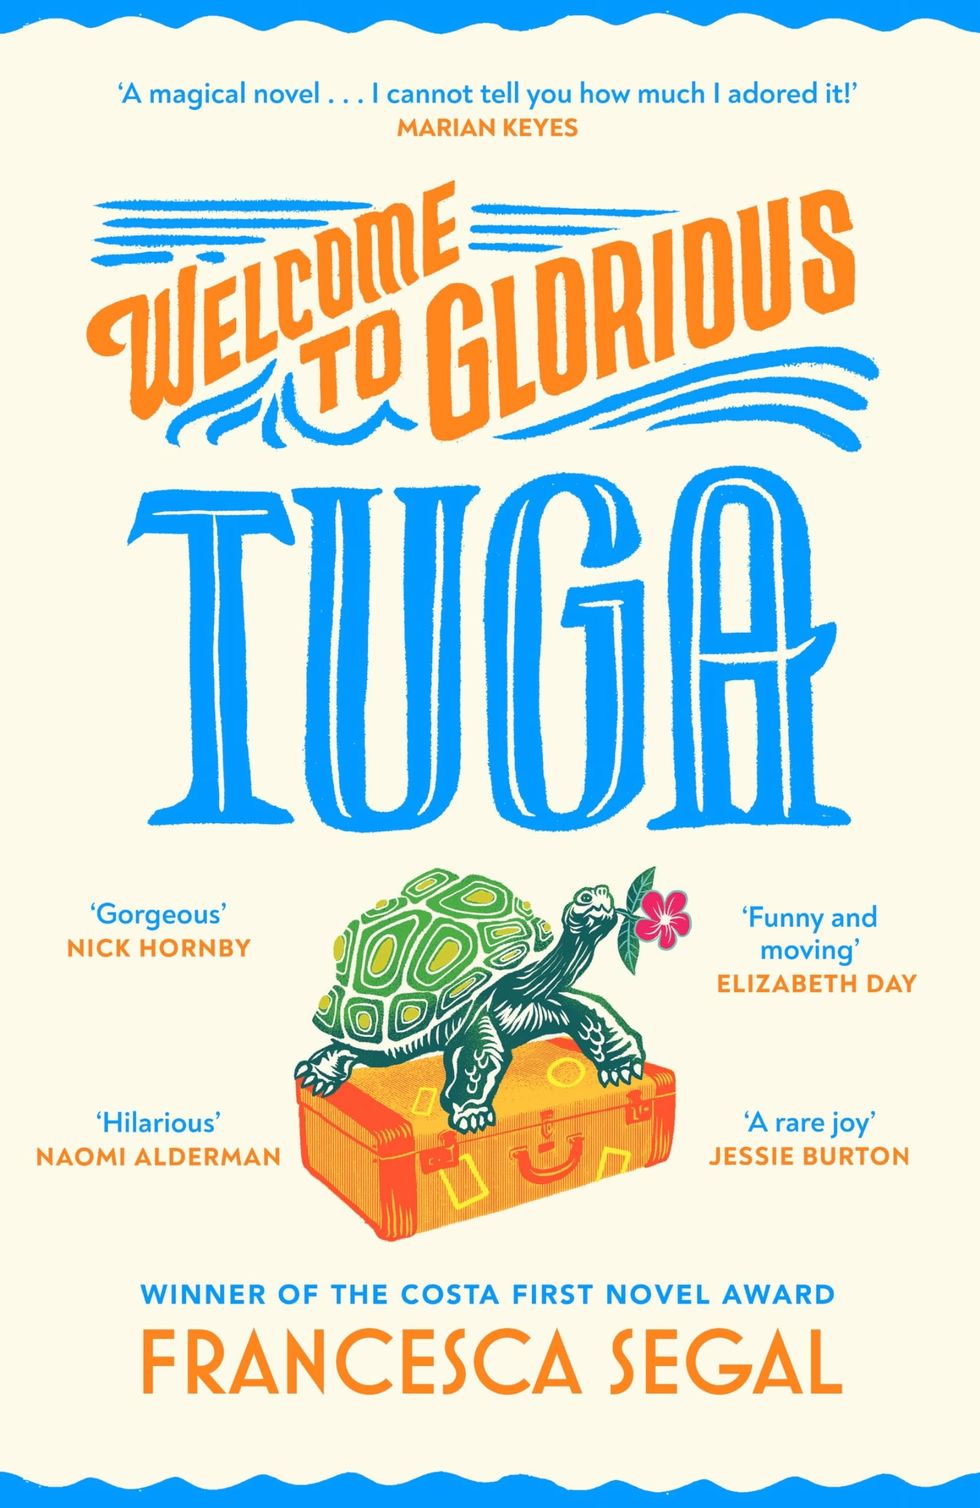 Welcome to Glorious Tuga by Francesca Segal